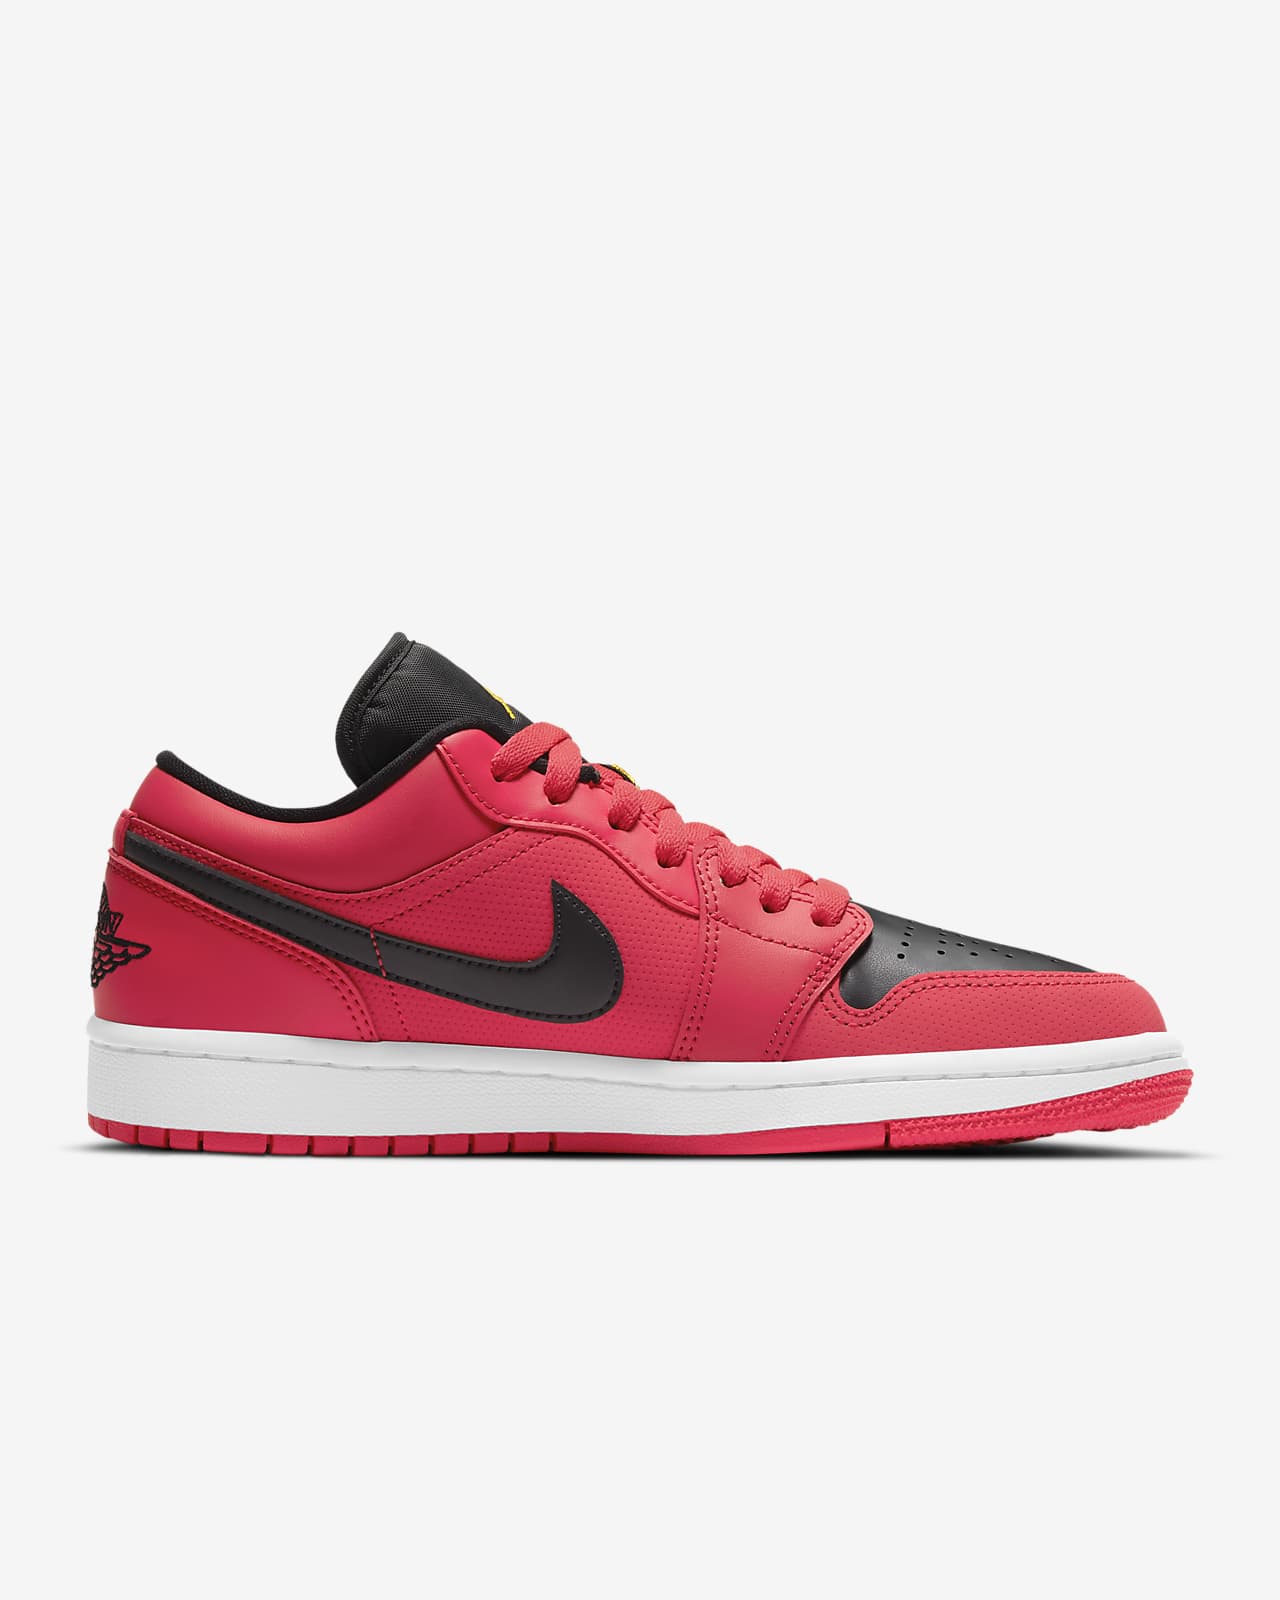 nike ones red and black